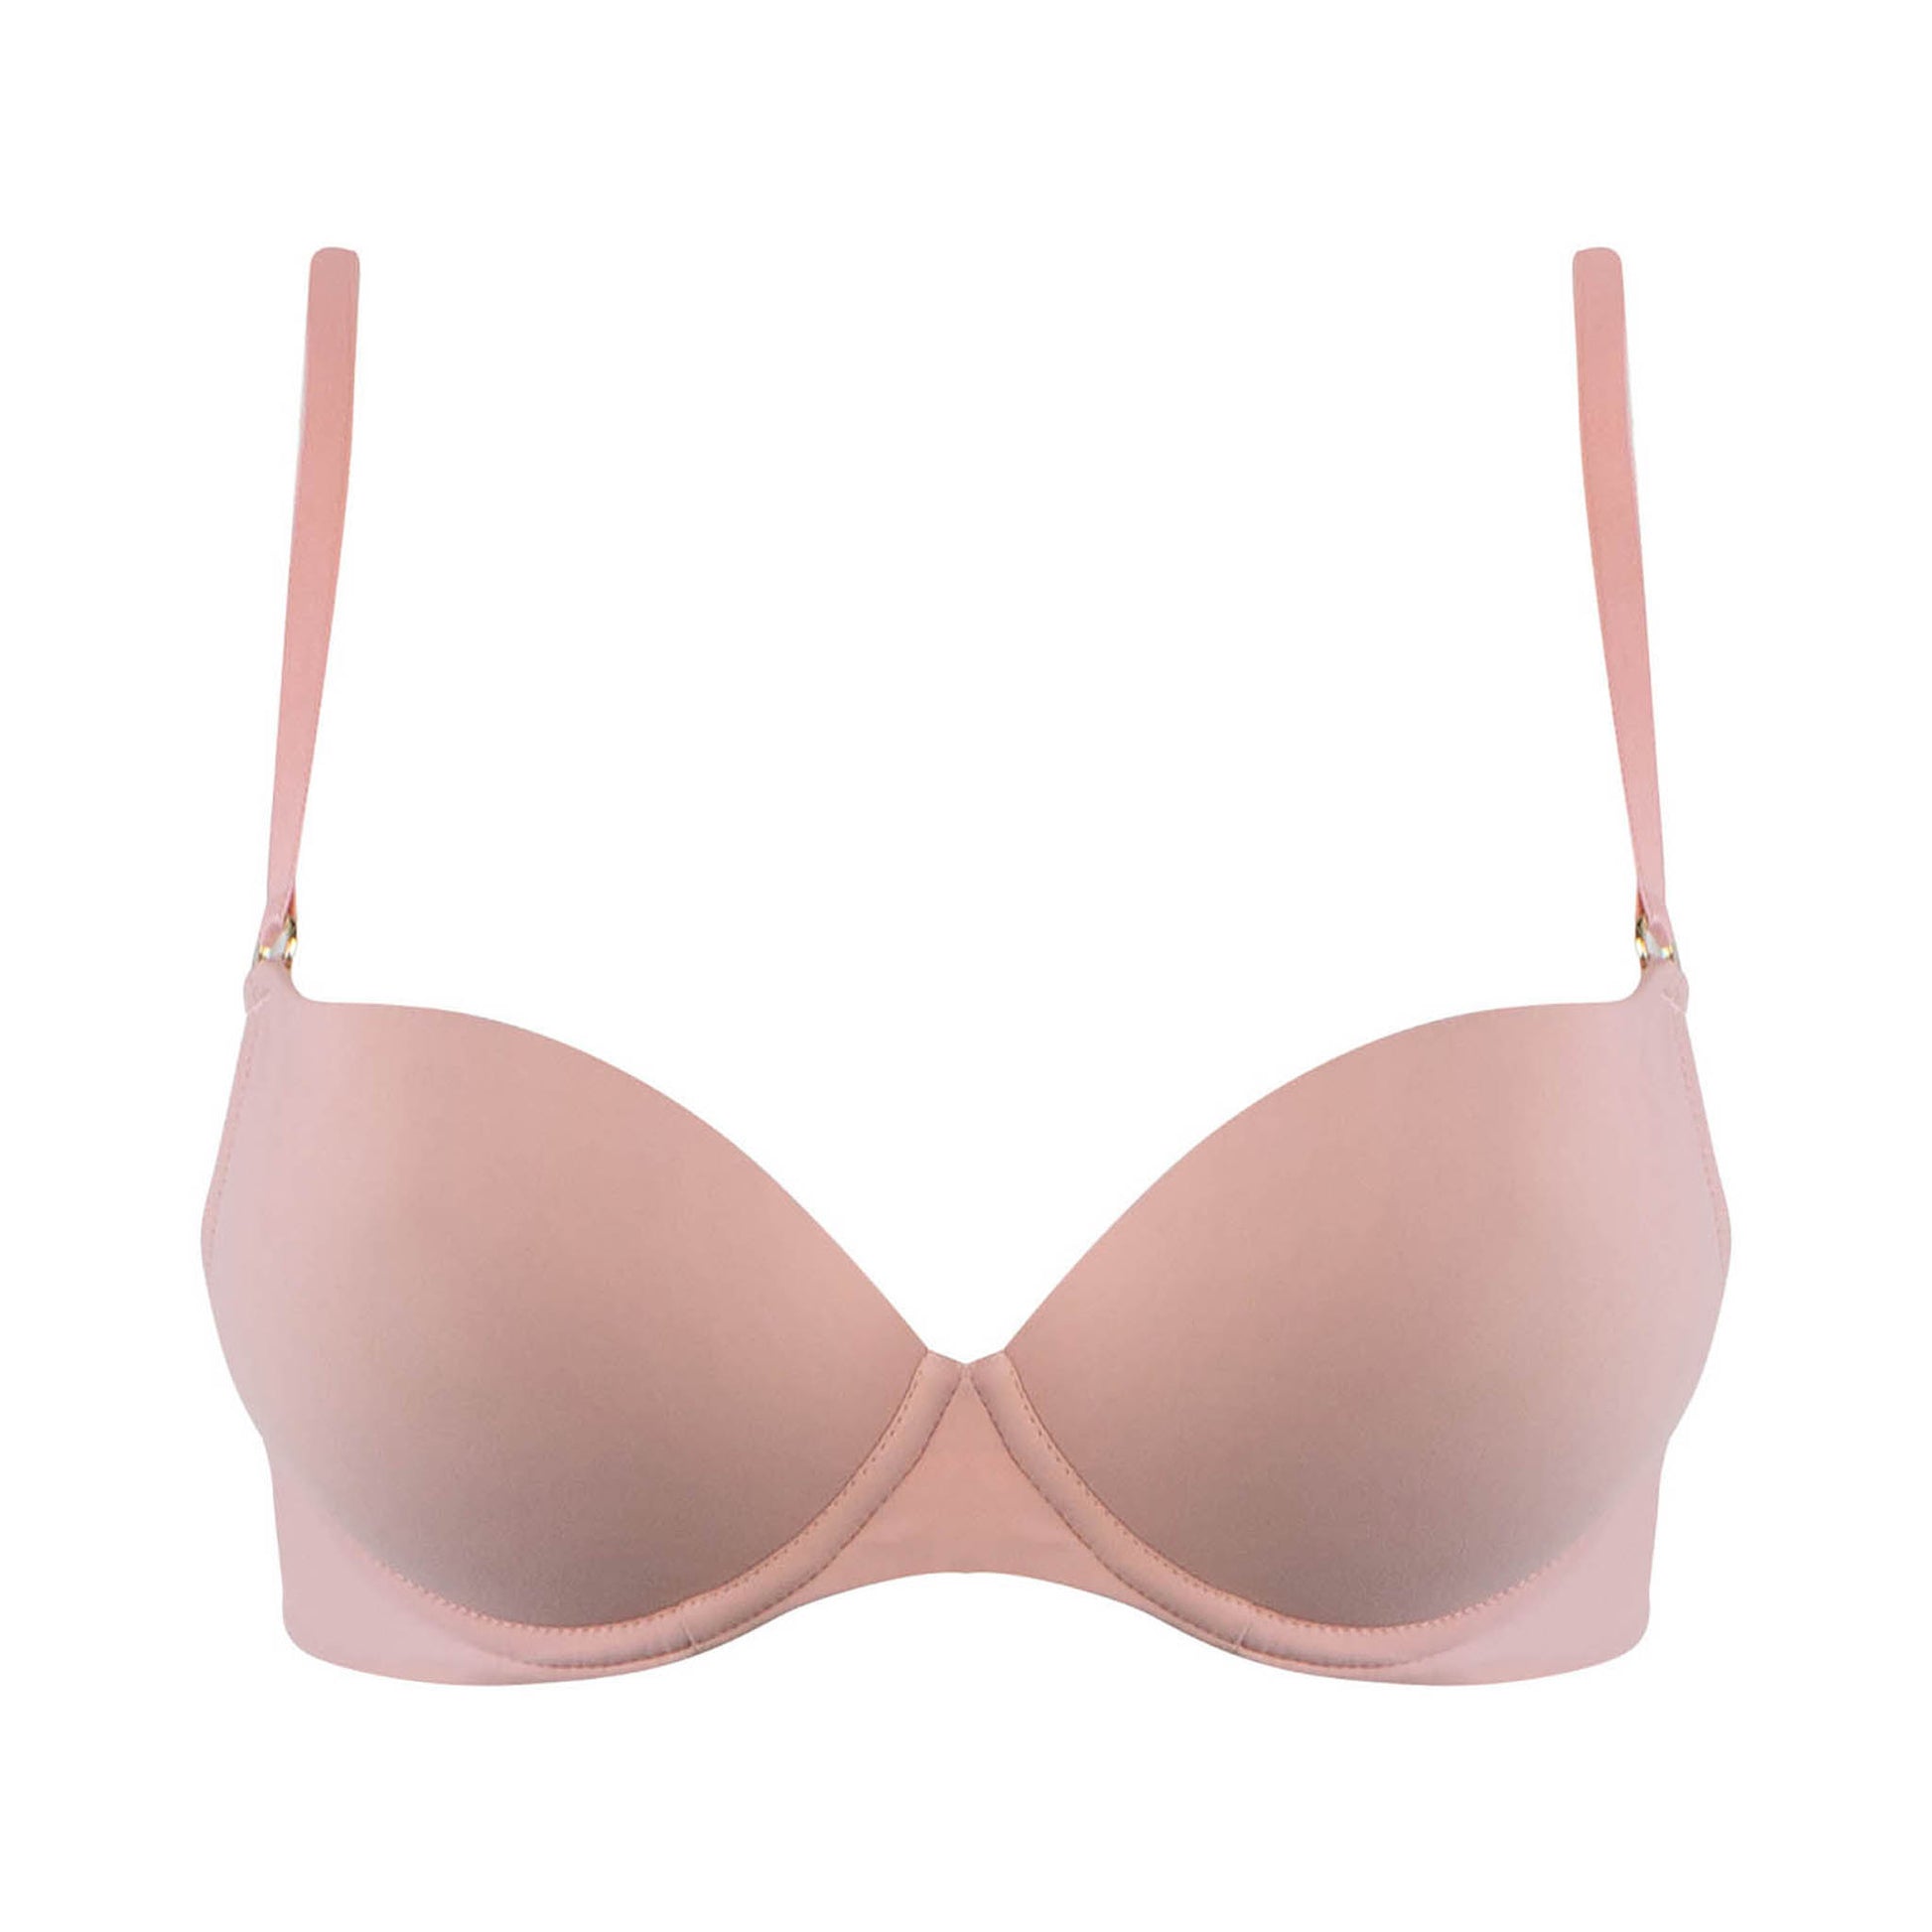 Nokaya basics nude push-up bra, support from underwire. The perfect smooth lines create an invisible fit.